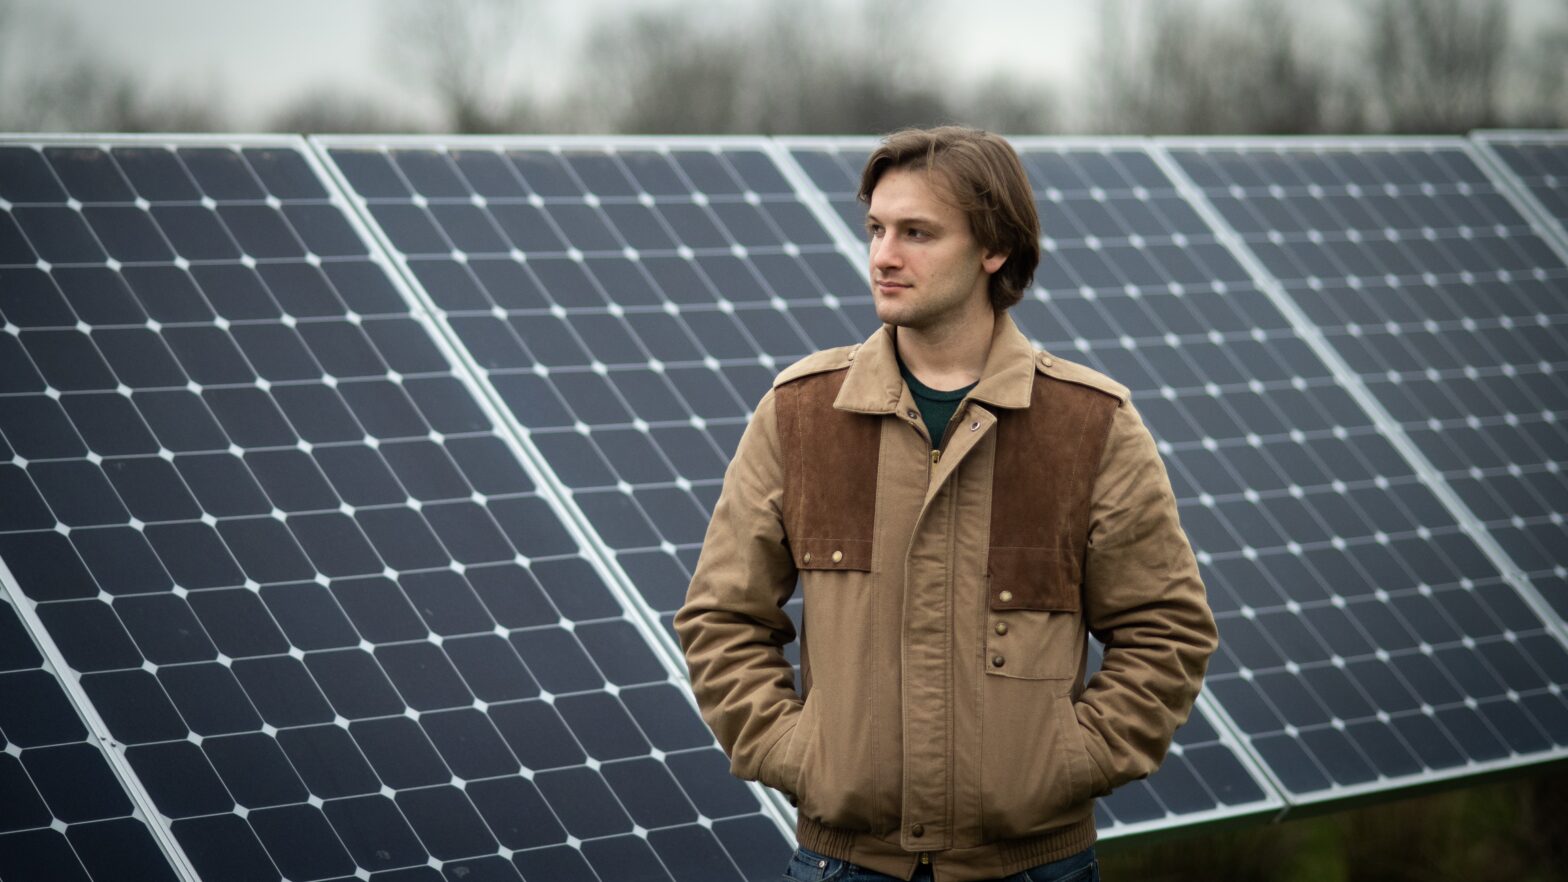 A man stands in front of a solar panel array.